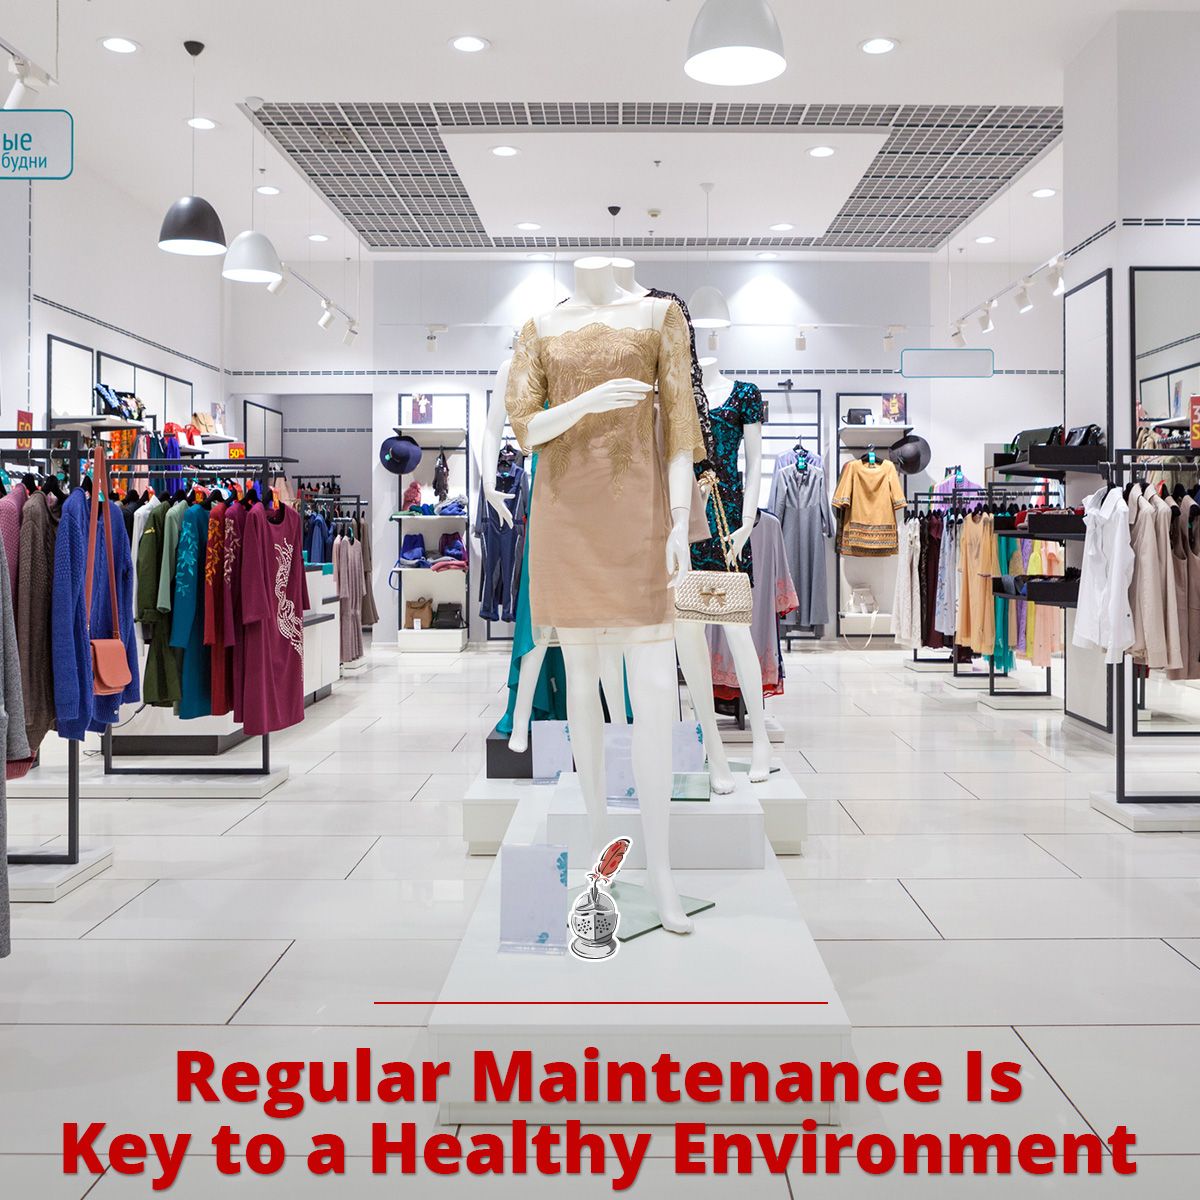 Regular Maintenance Is Key to a Healthy Environment